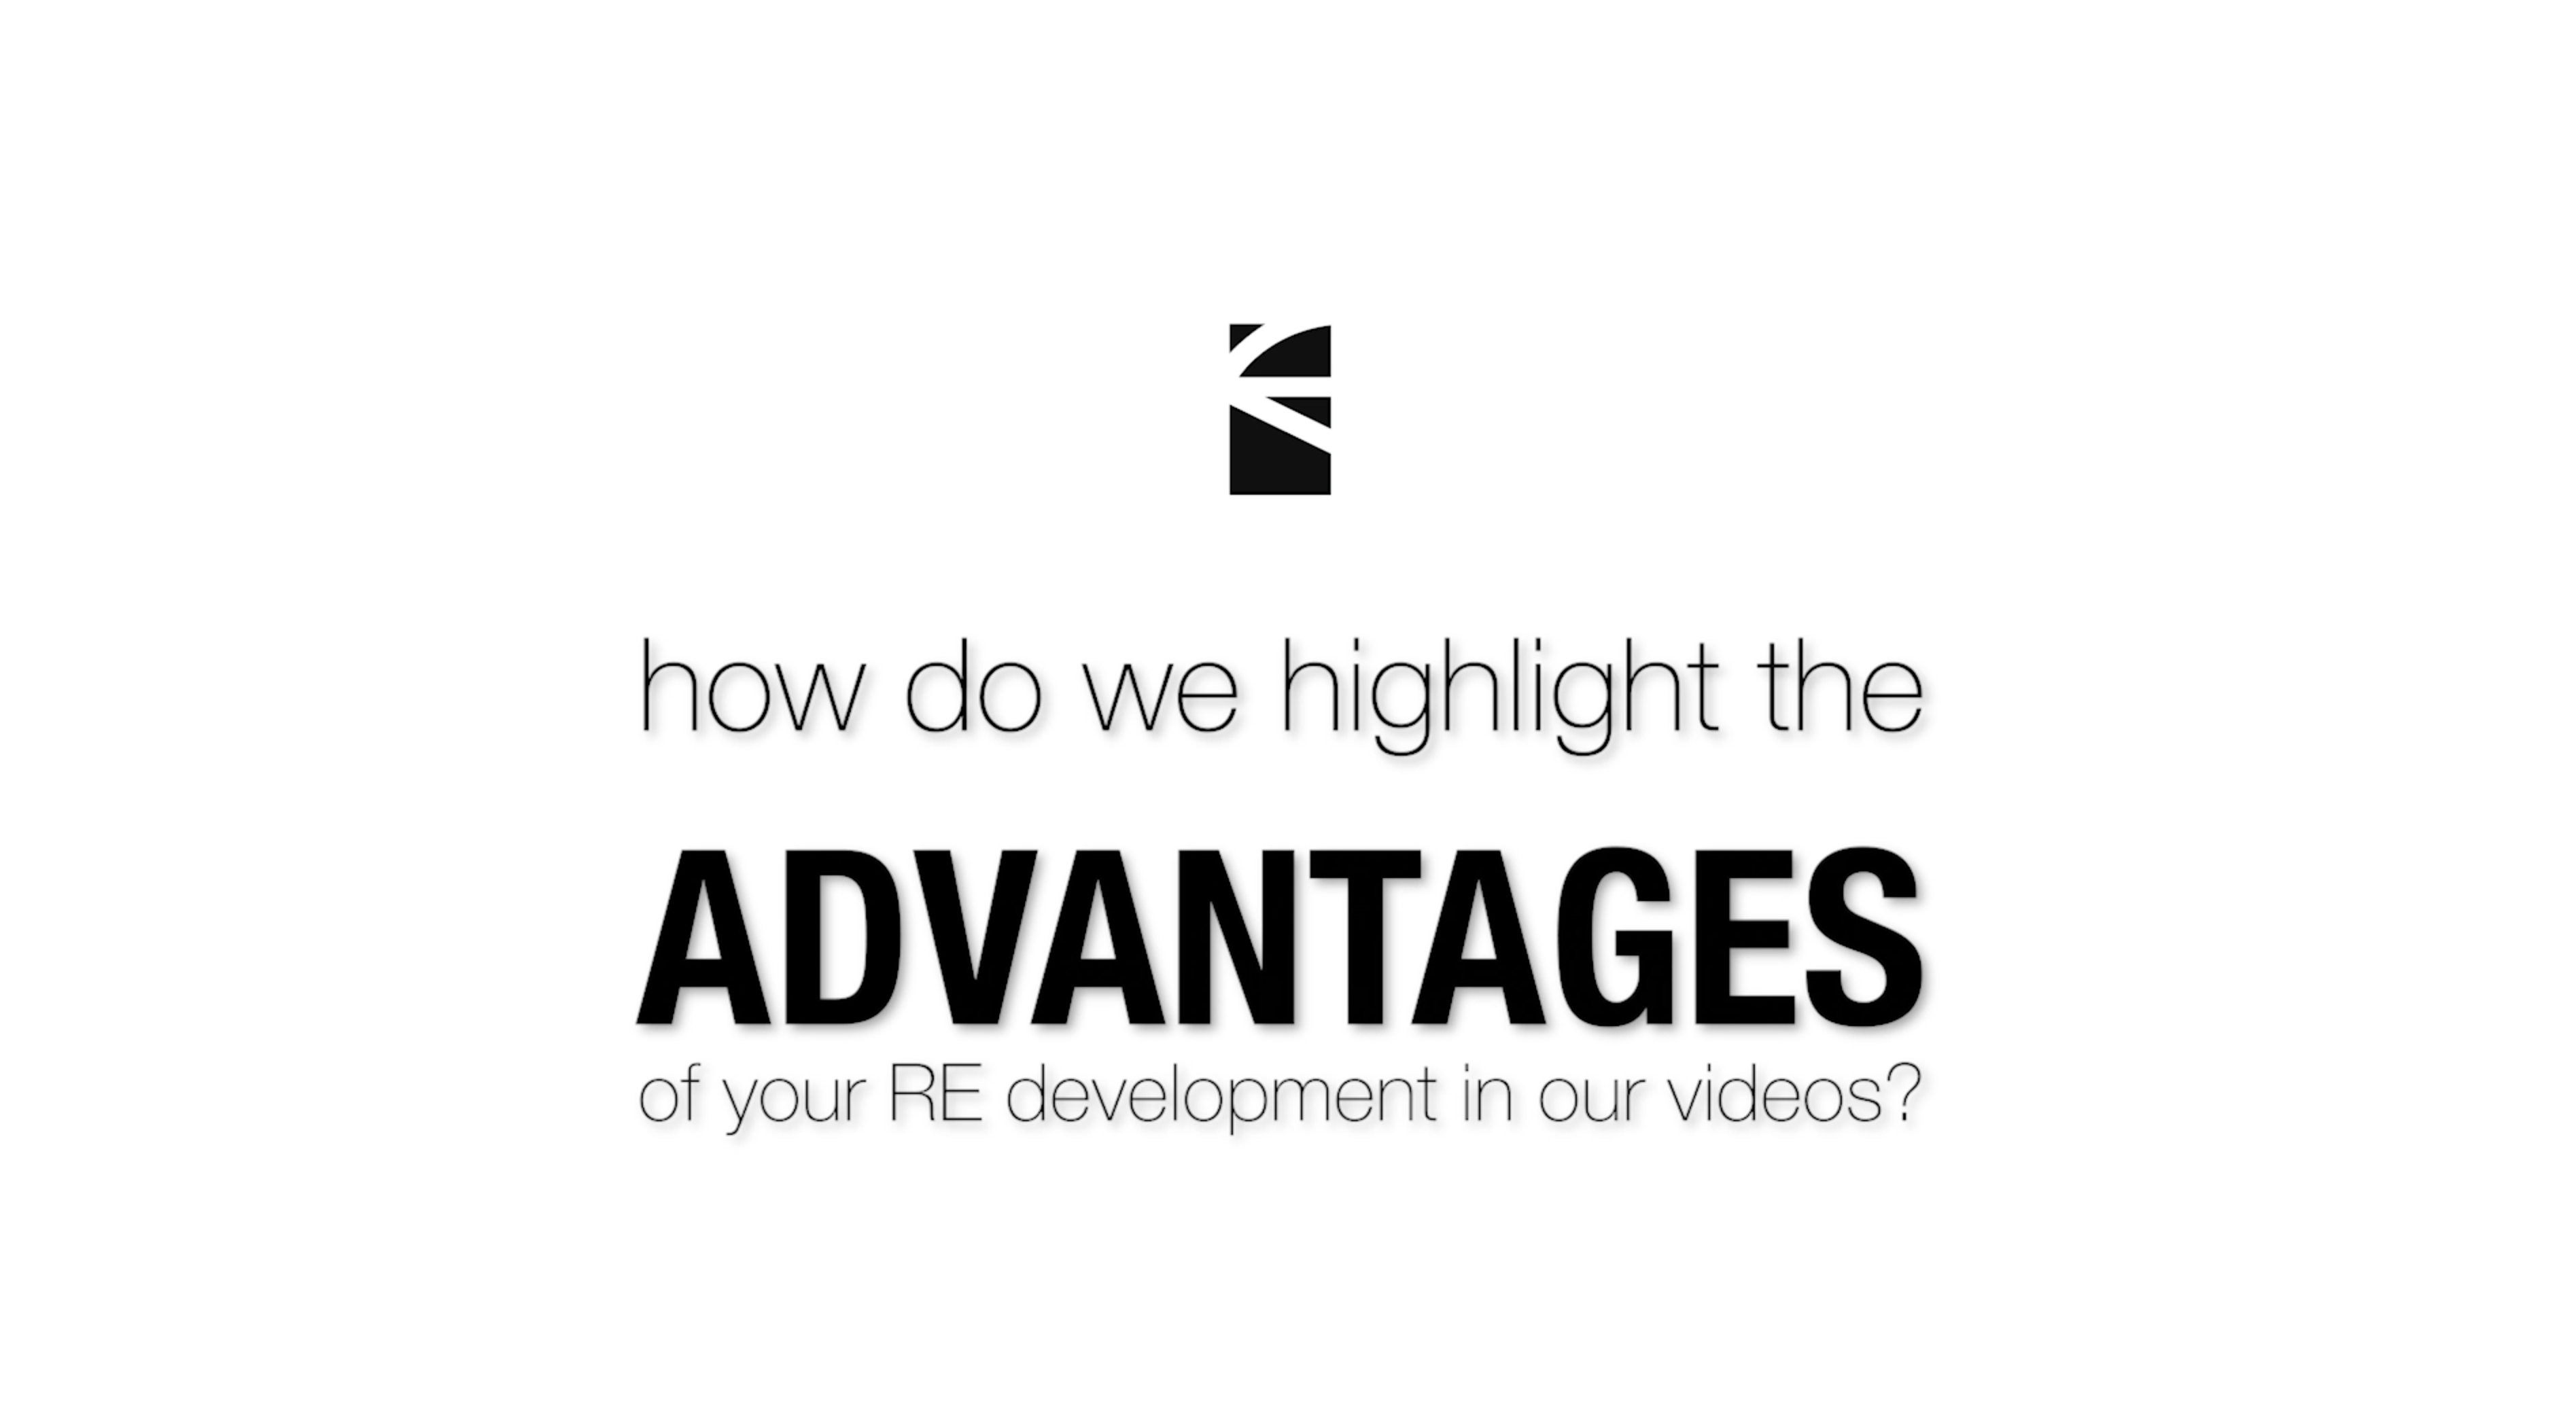 How do we highlight the ADVANTAGES of your RE development in our videos?